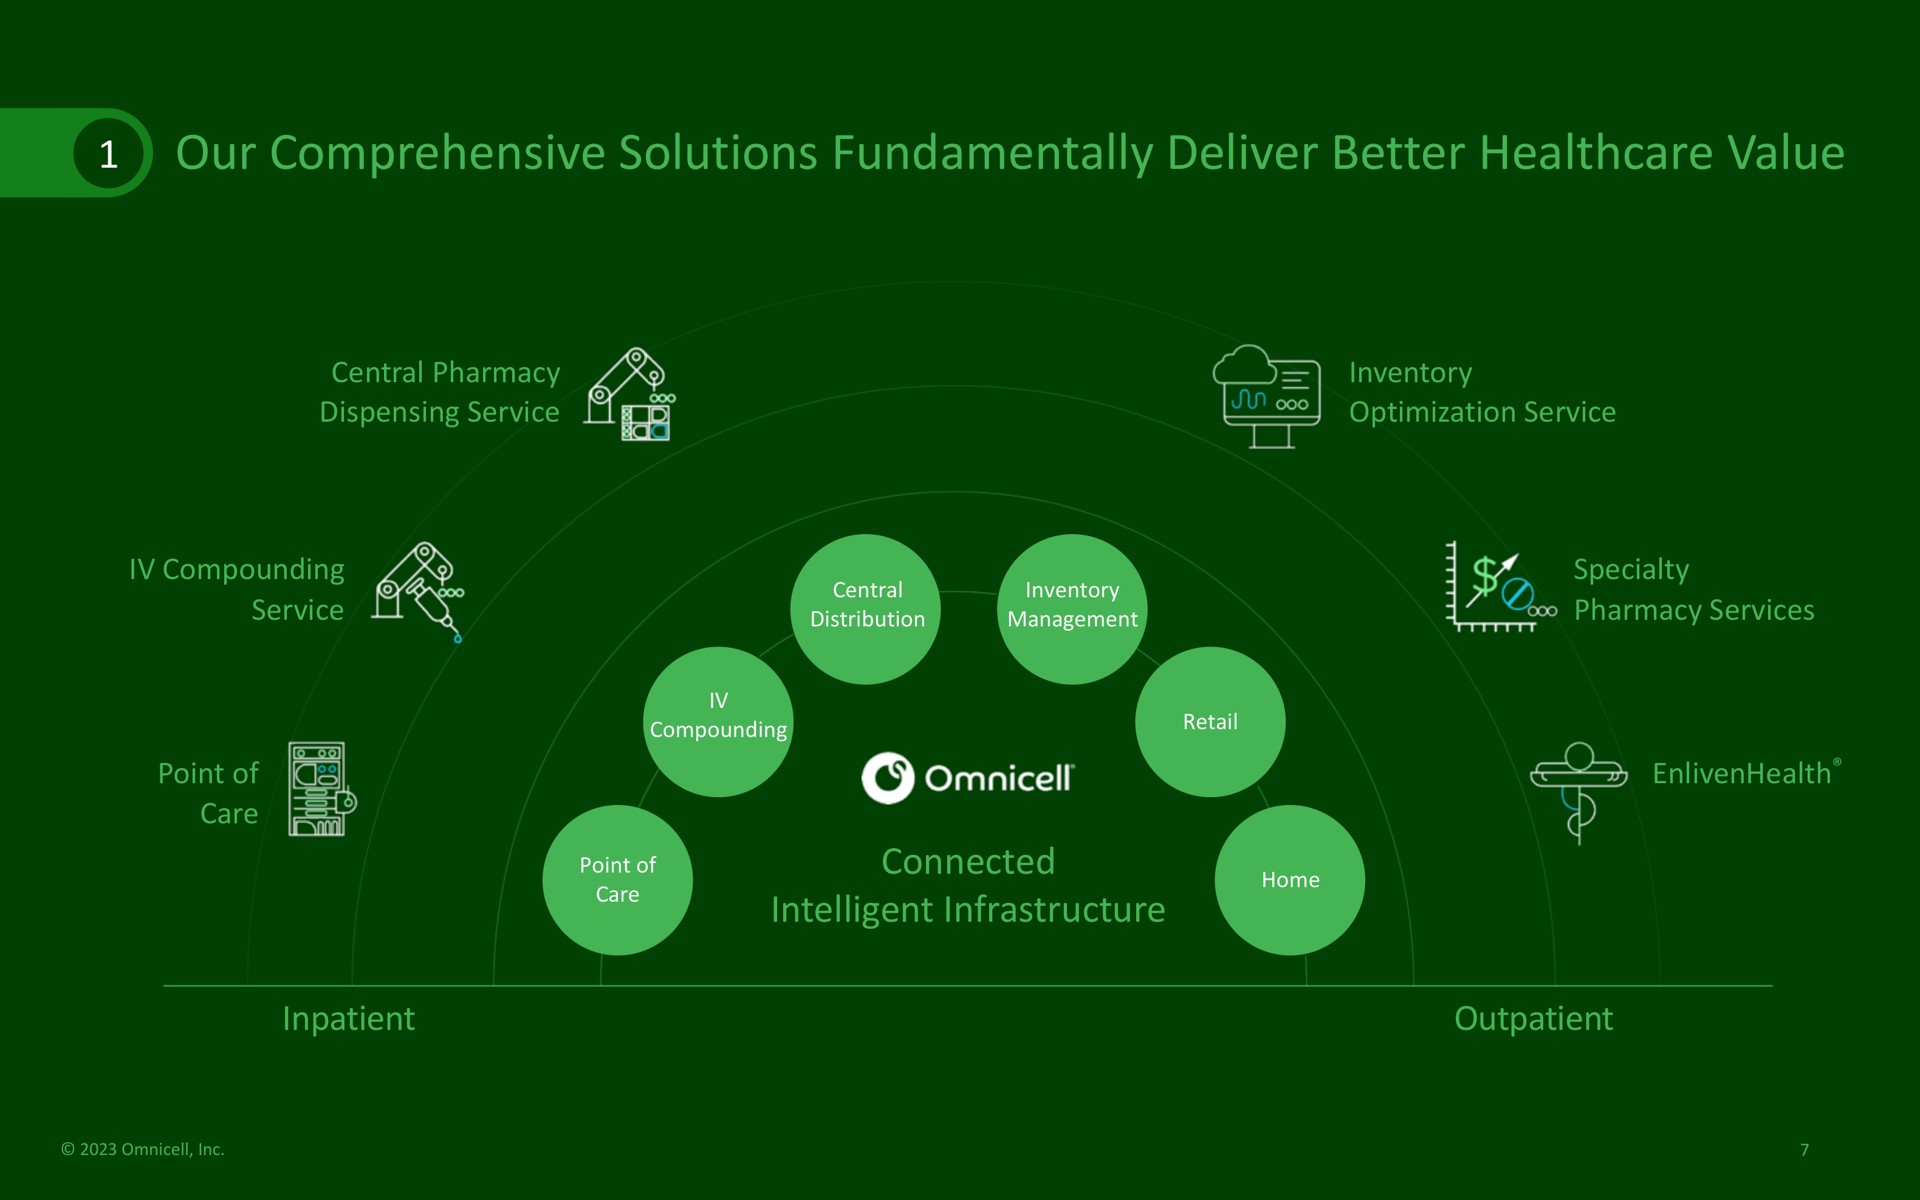 our comprehensive solutions fundamentally deliver better value connected intelligent infrastructure inpatient outpatient compounding specialty | Omnicell